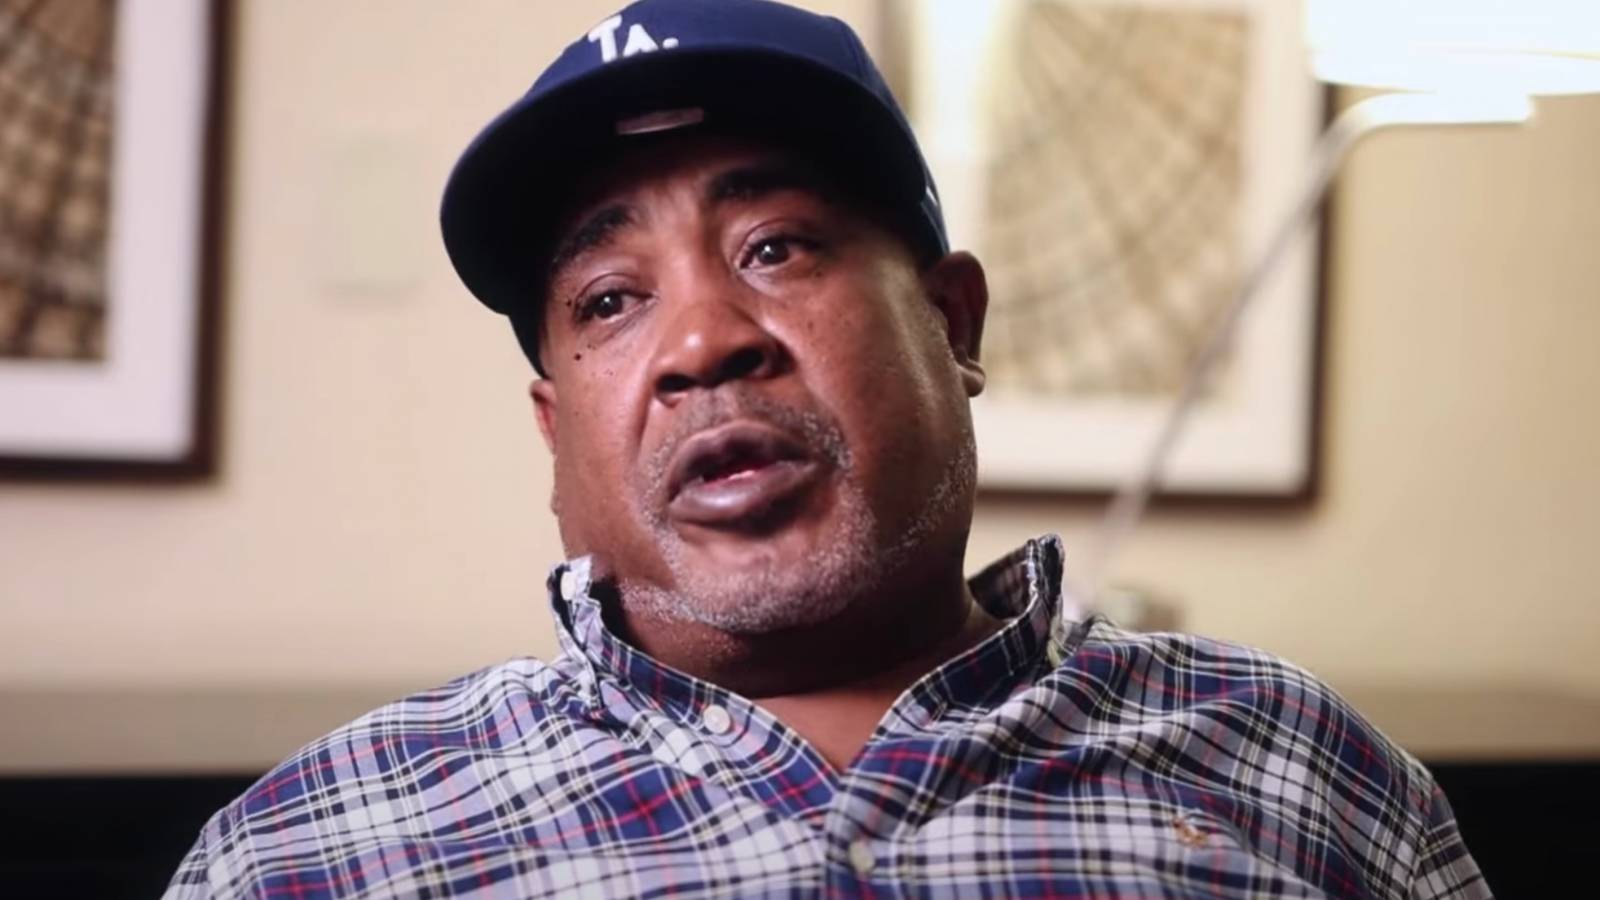 New Development In The Tupac Murder Case: Keefe D’s Confessional Interview Raises Questions